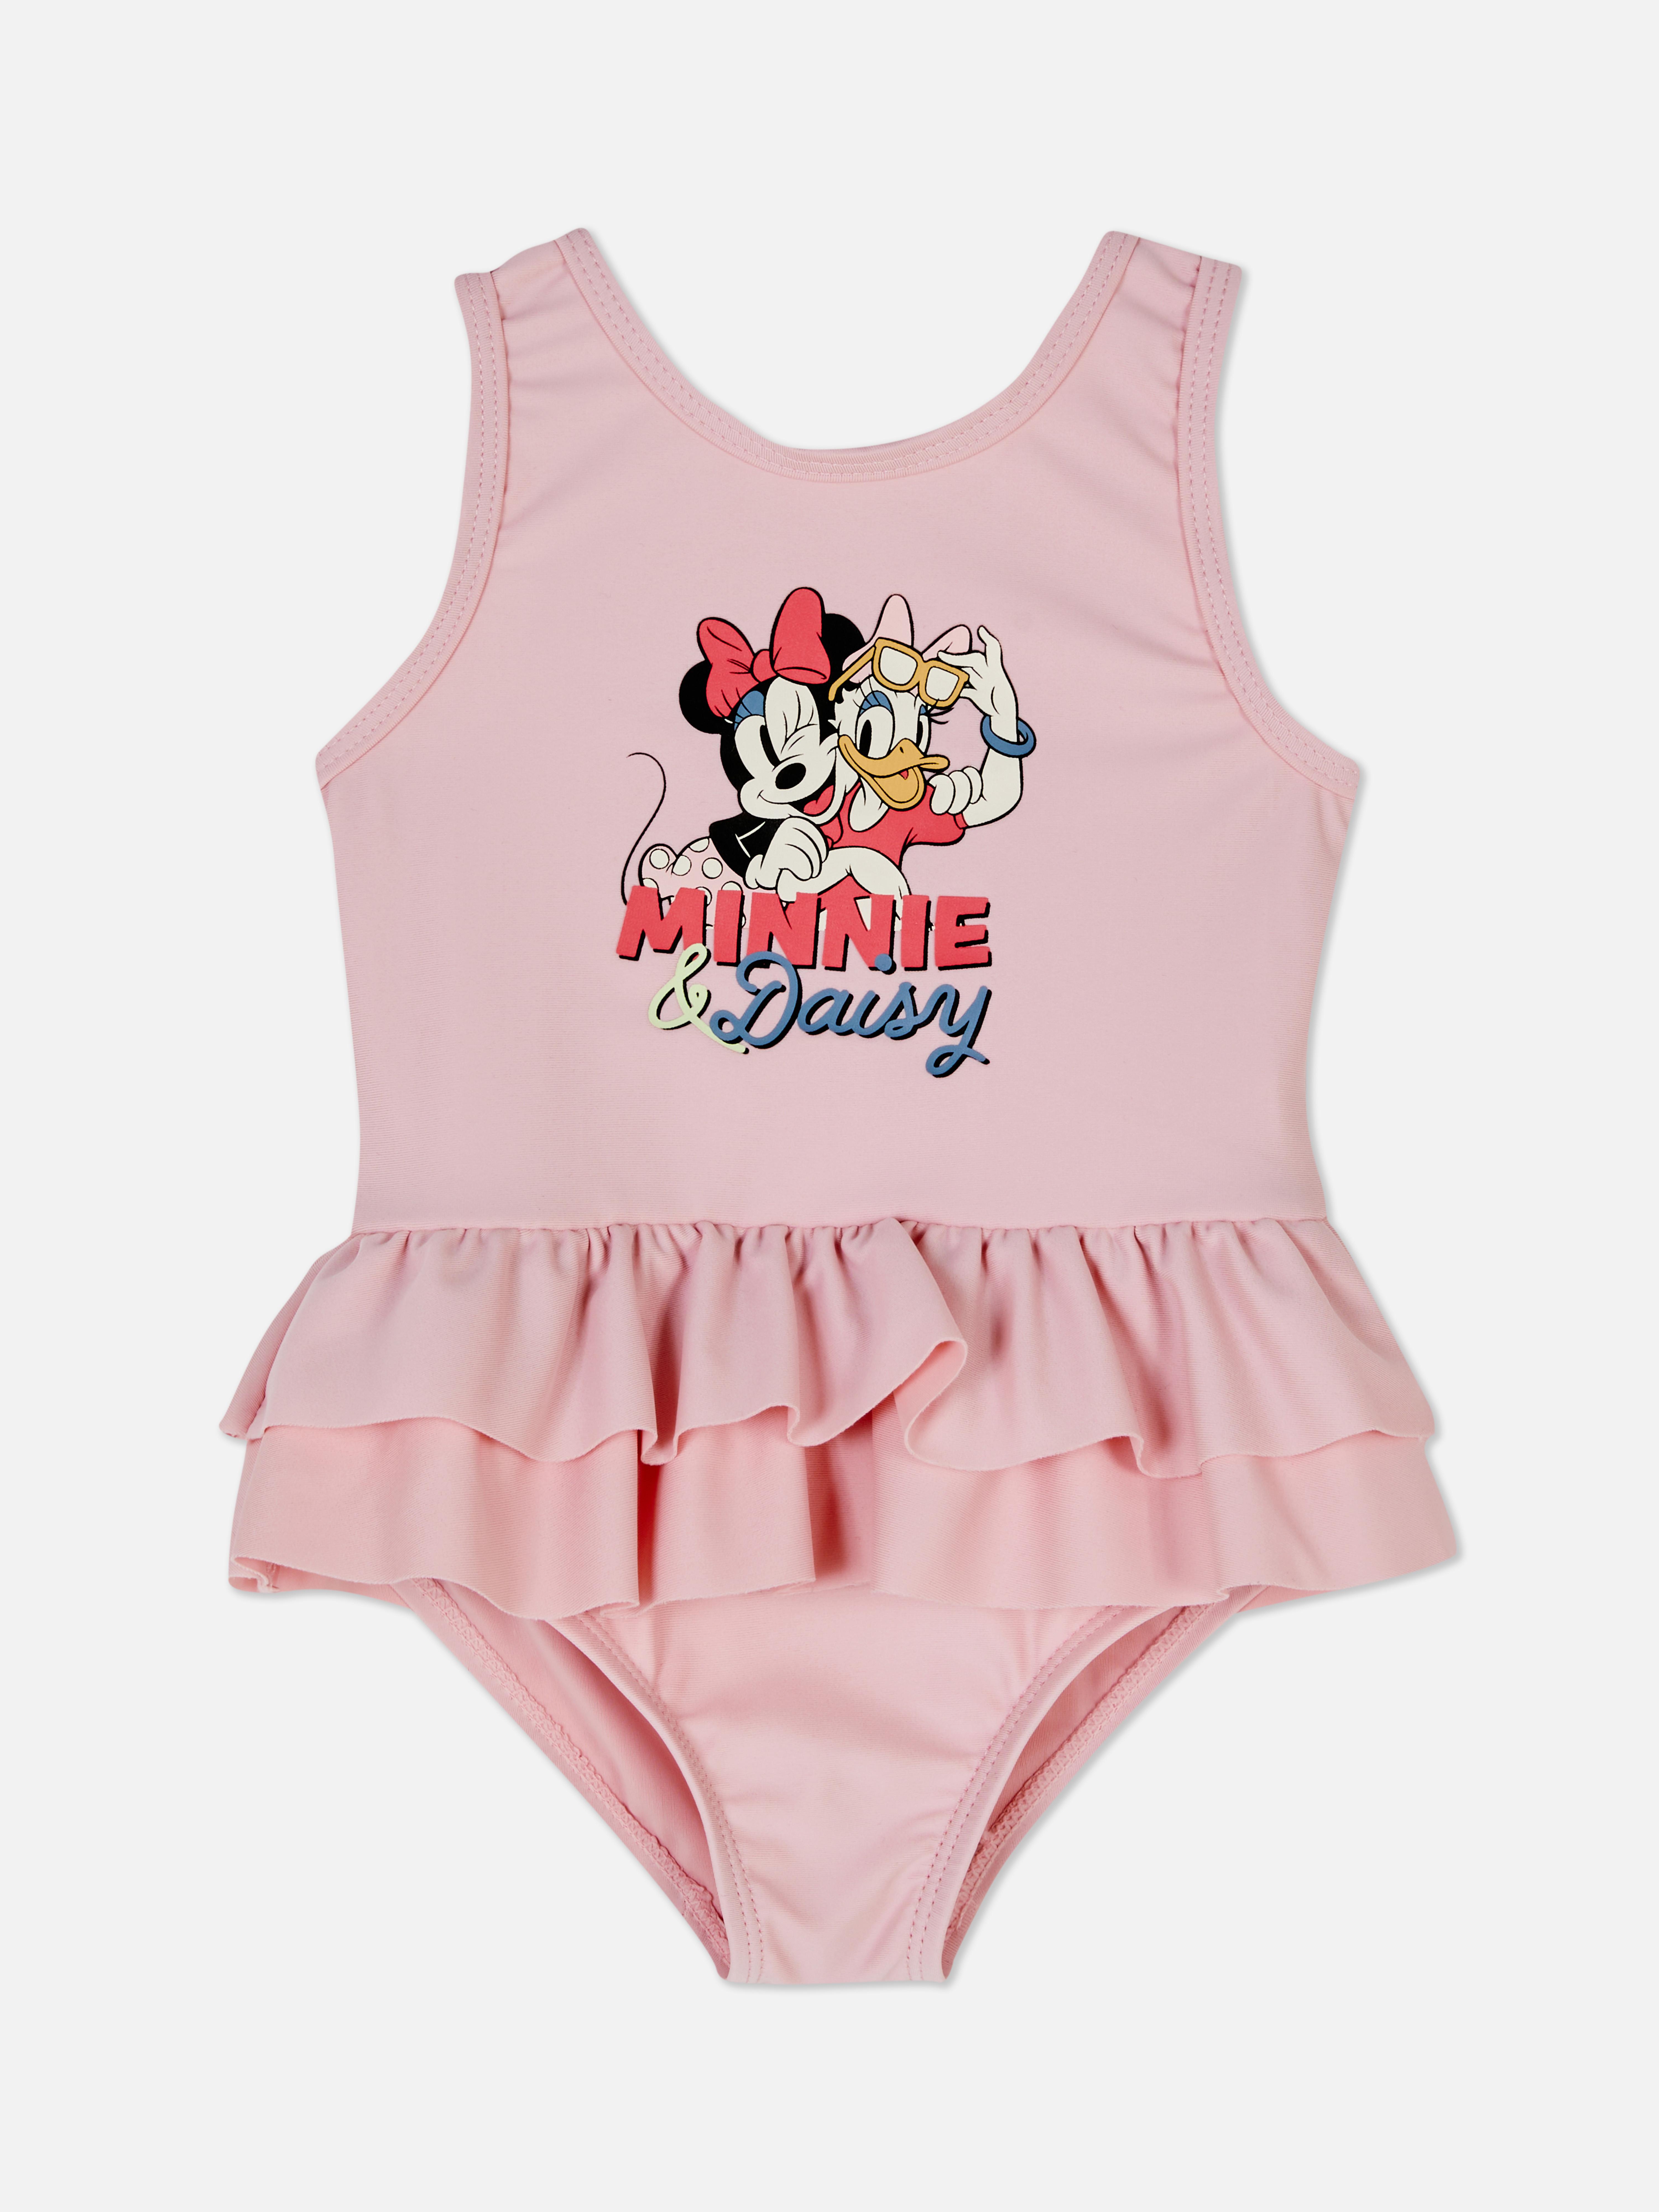 Disney's Minnie Mouse & Friends Frilly Swimsuit